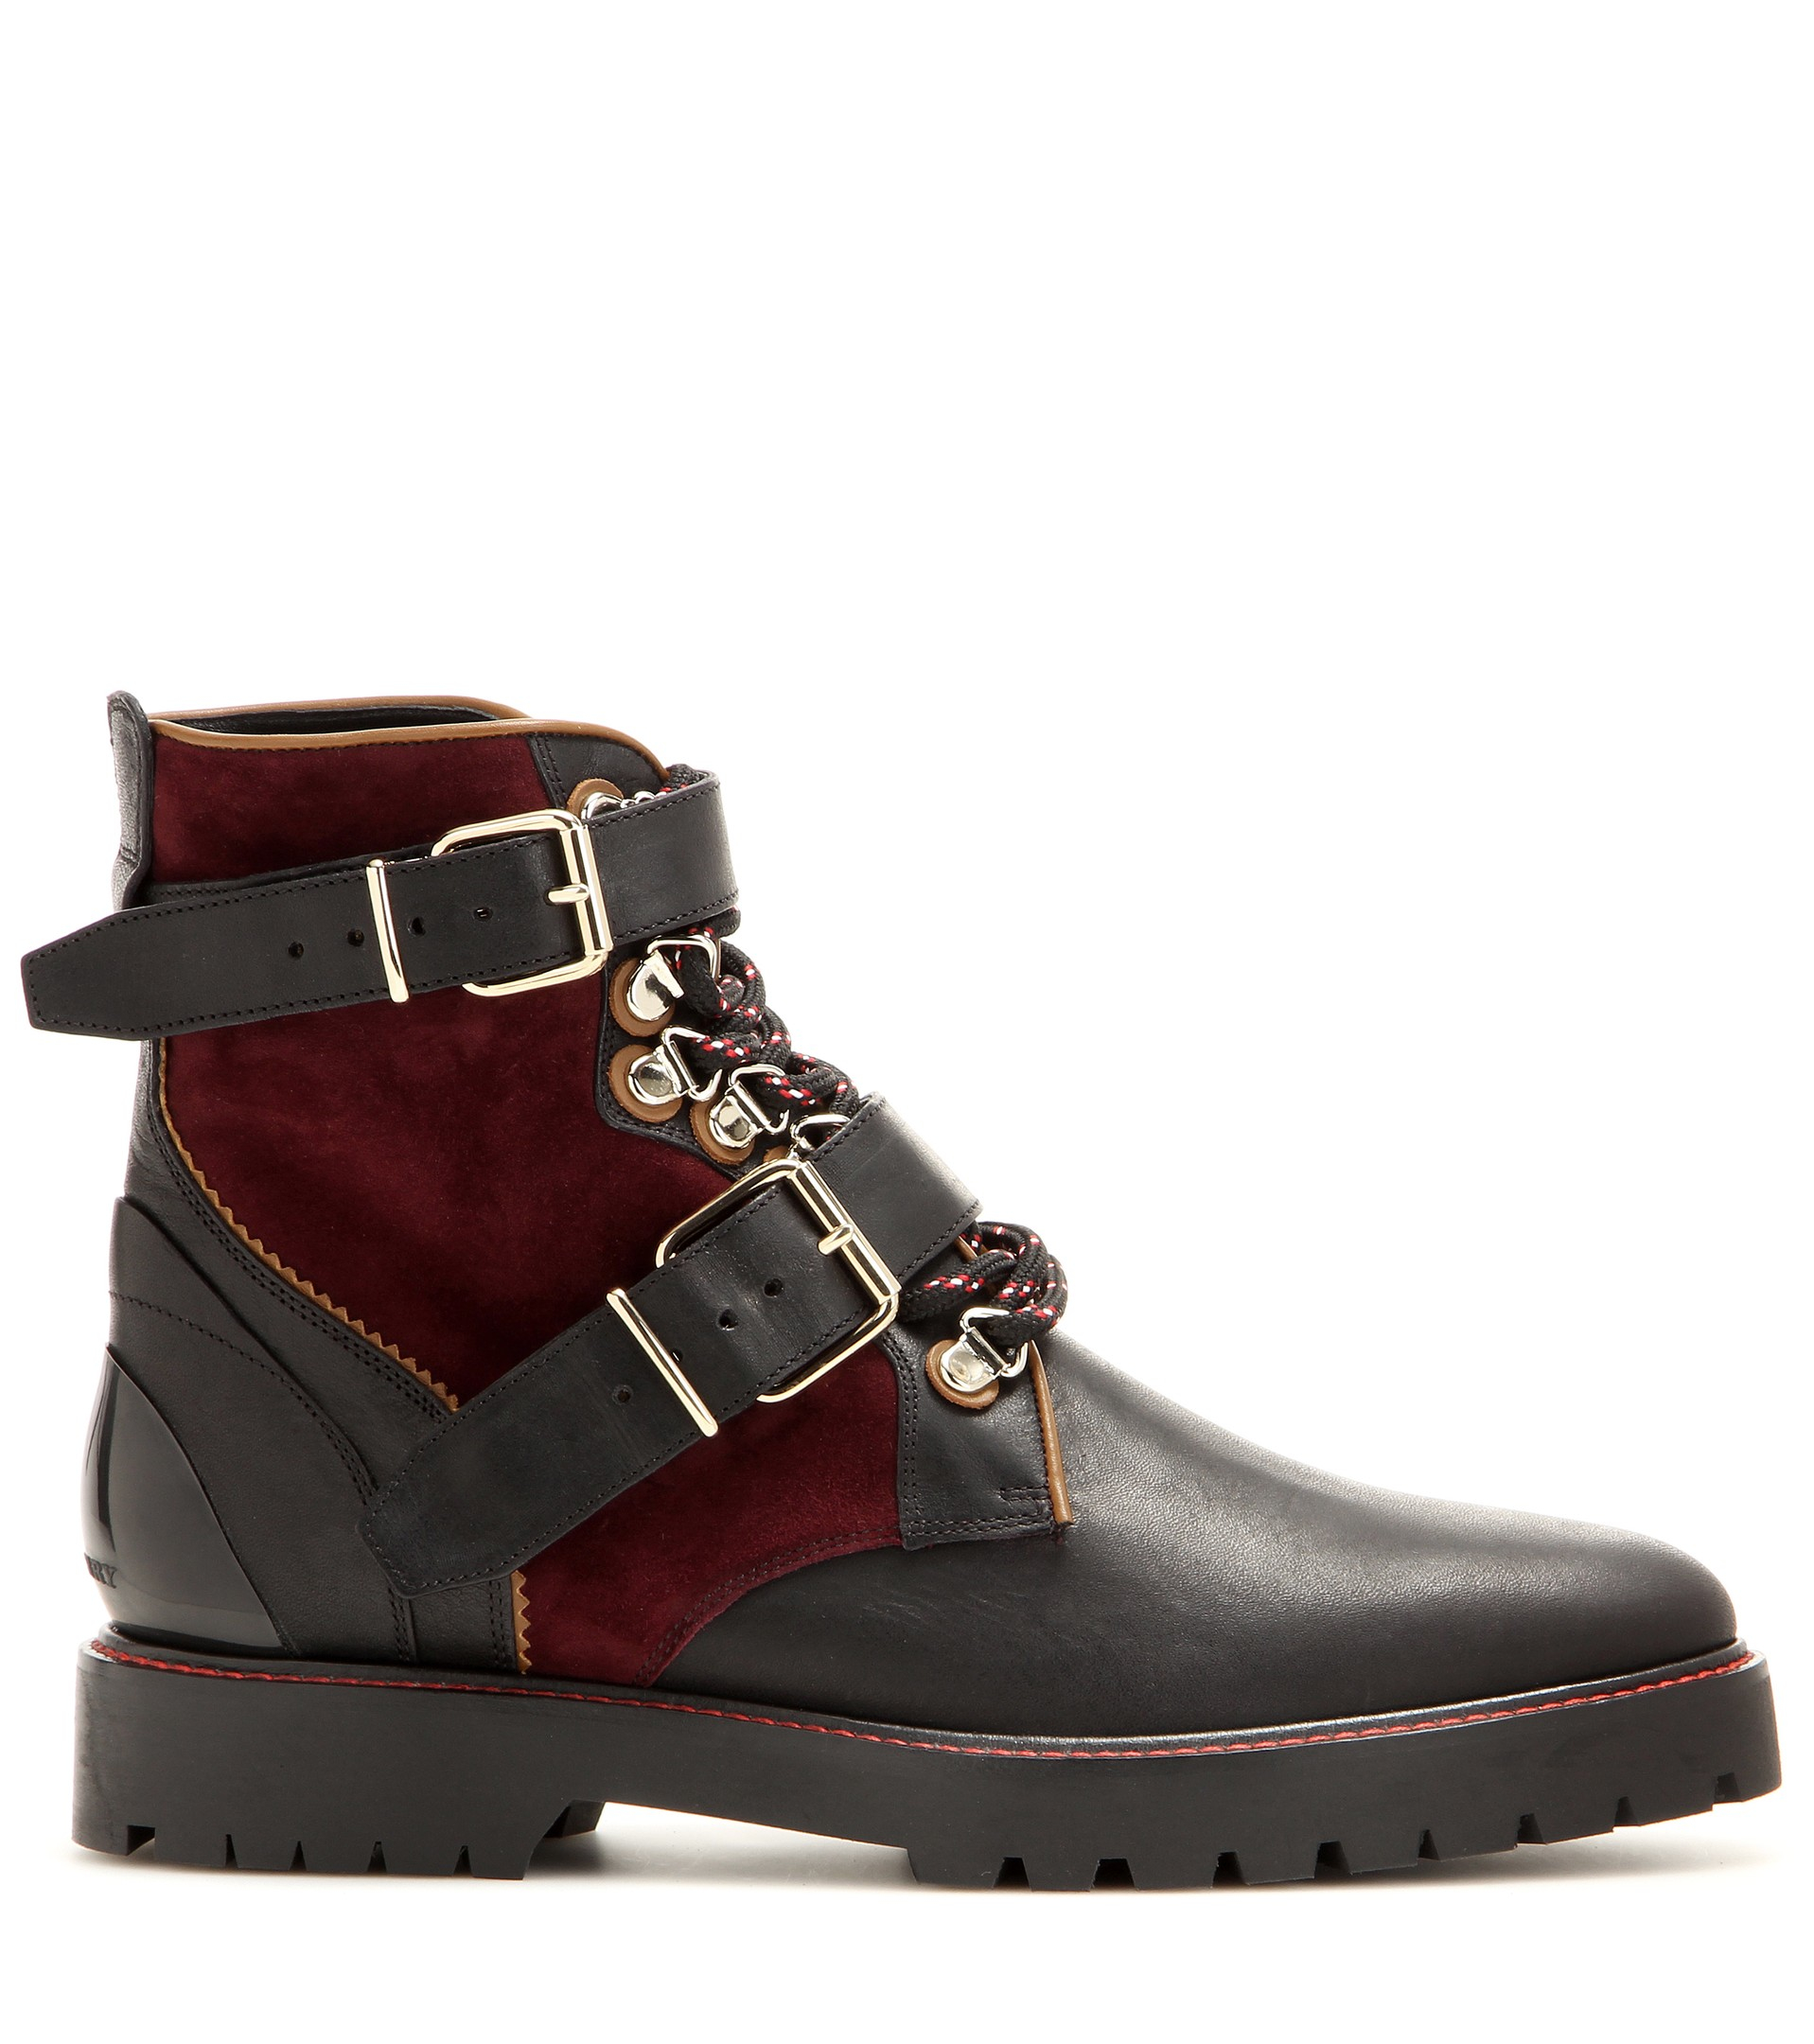 burberry brit boots Online Shopping for Women, Men, Kids Fashion &  Lifestyle|Free Delivery & Returns! -